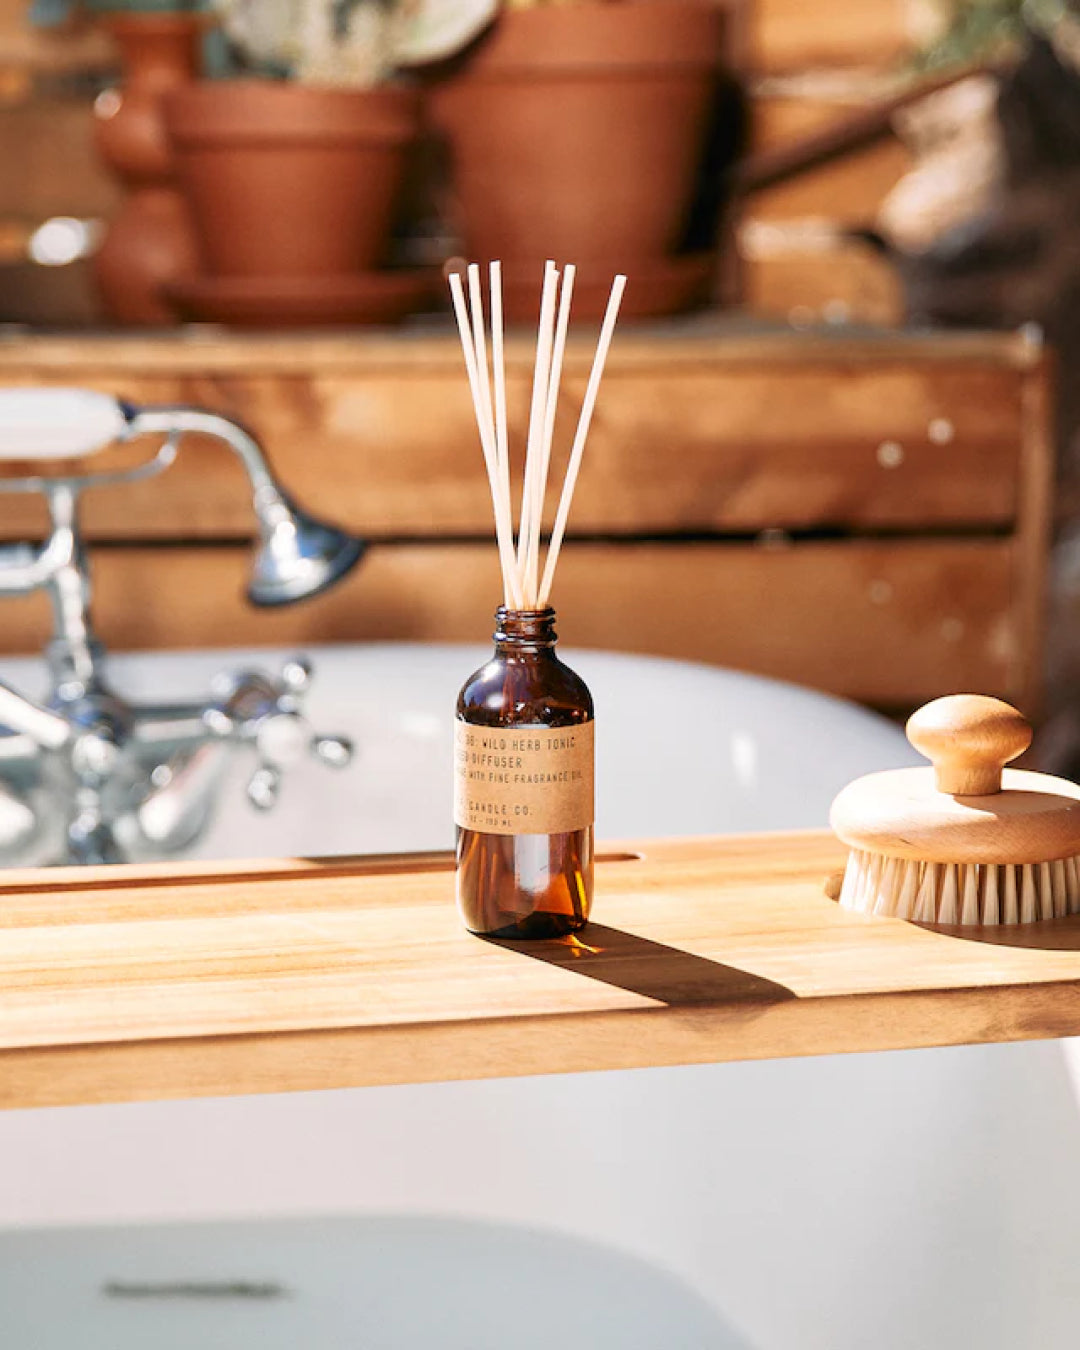 Reed Diffuser | Wild Herb Tonic